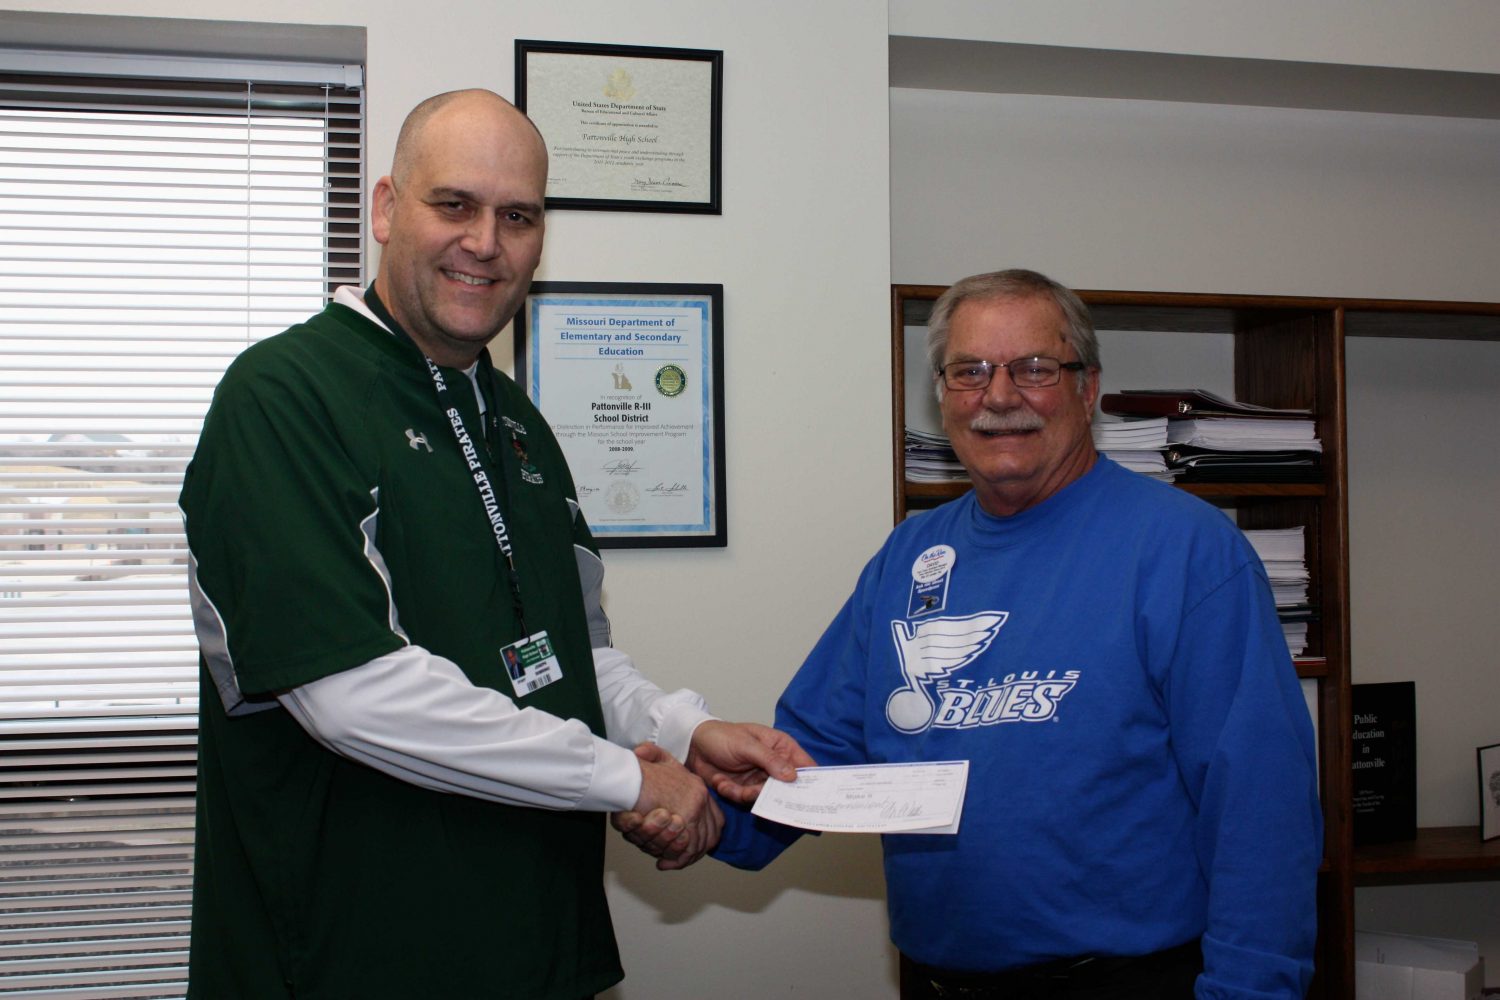 Mobil on the Run gives $500 grant to high school